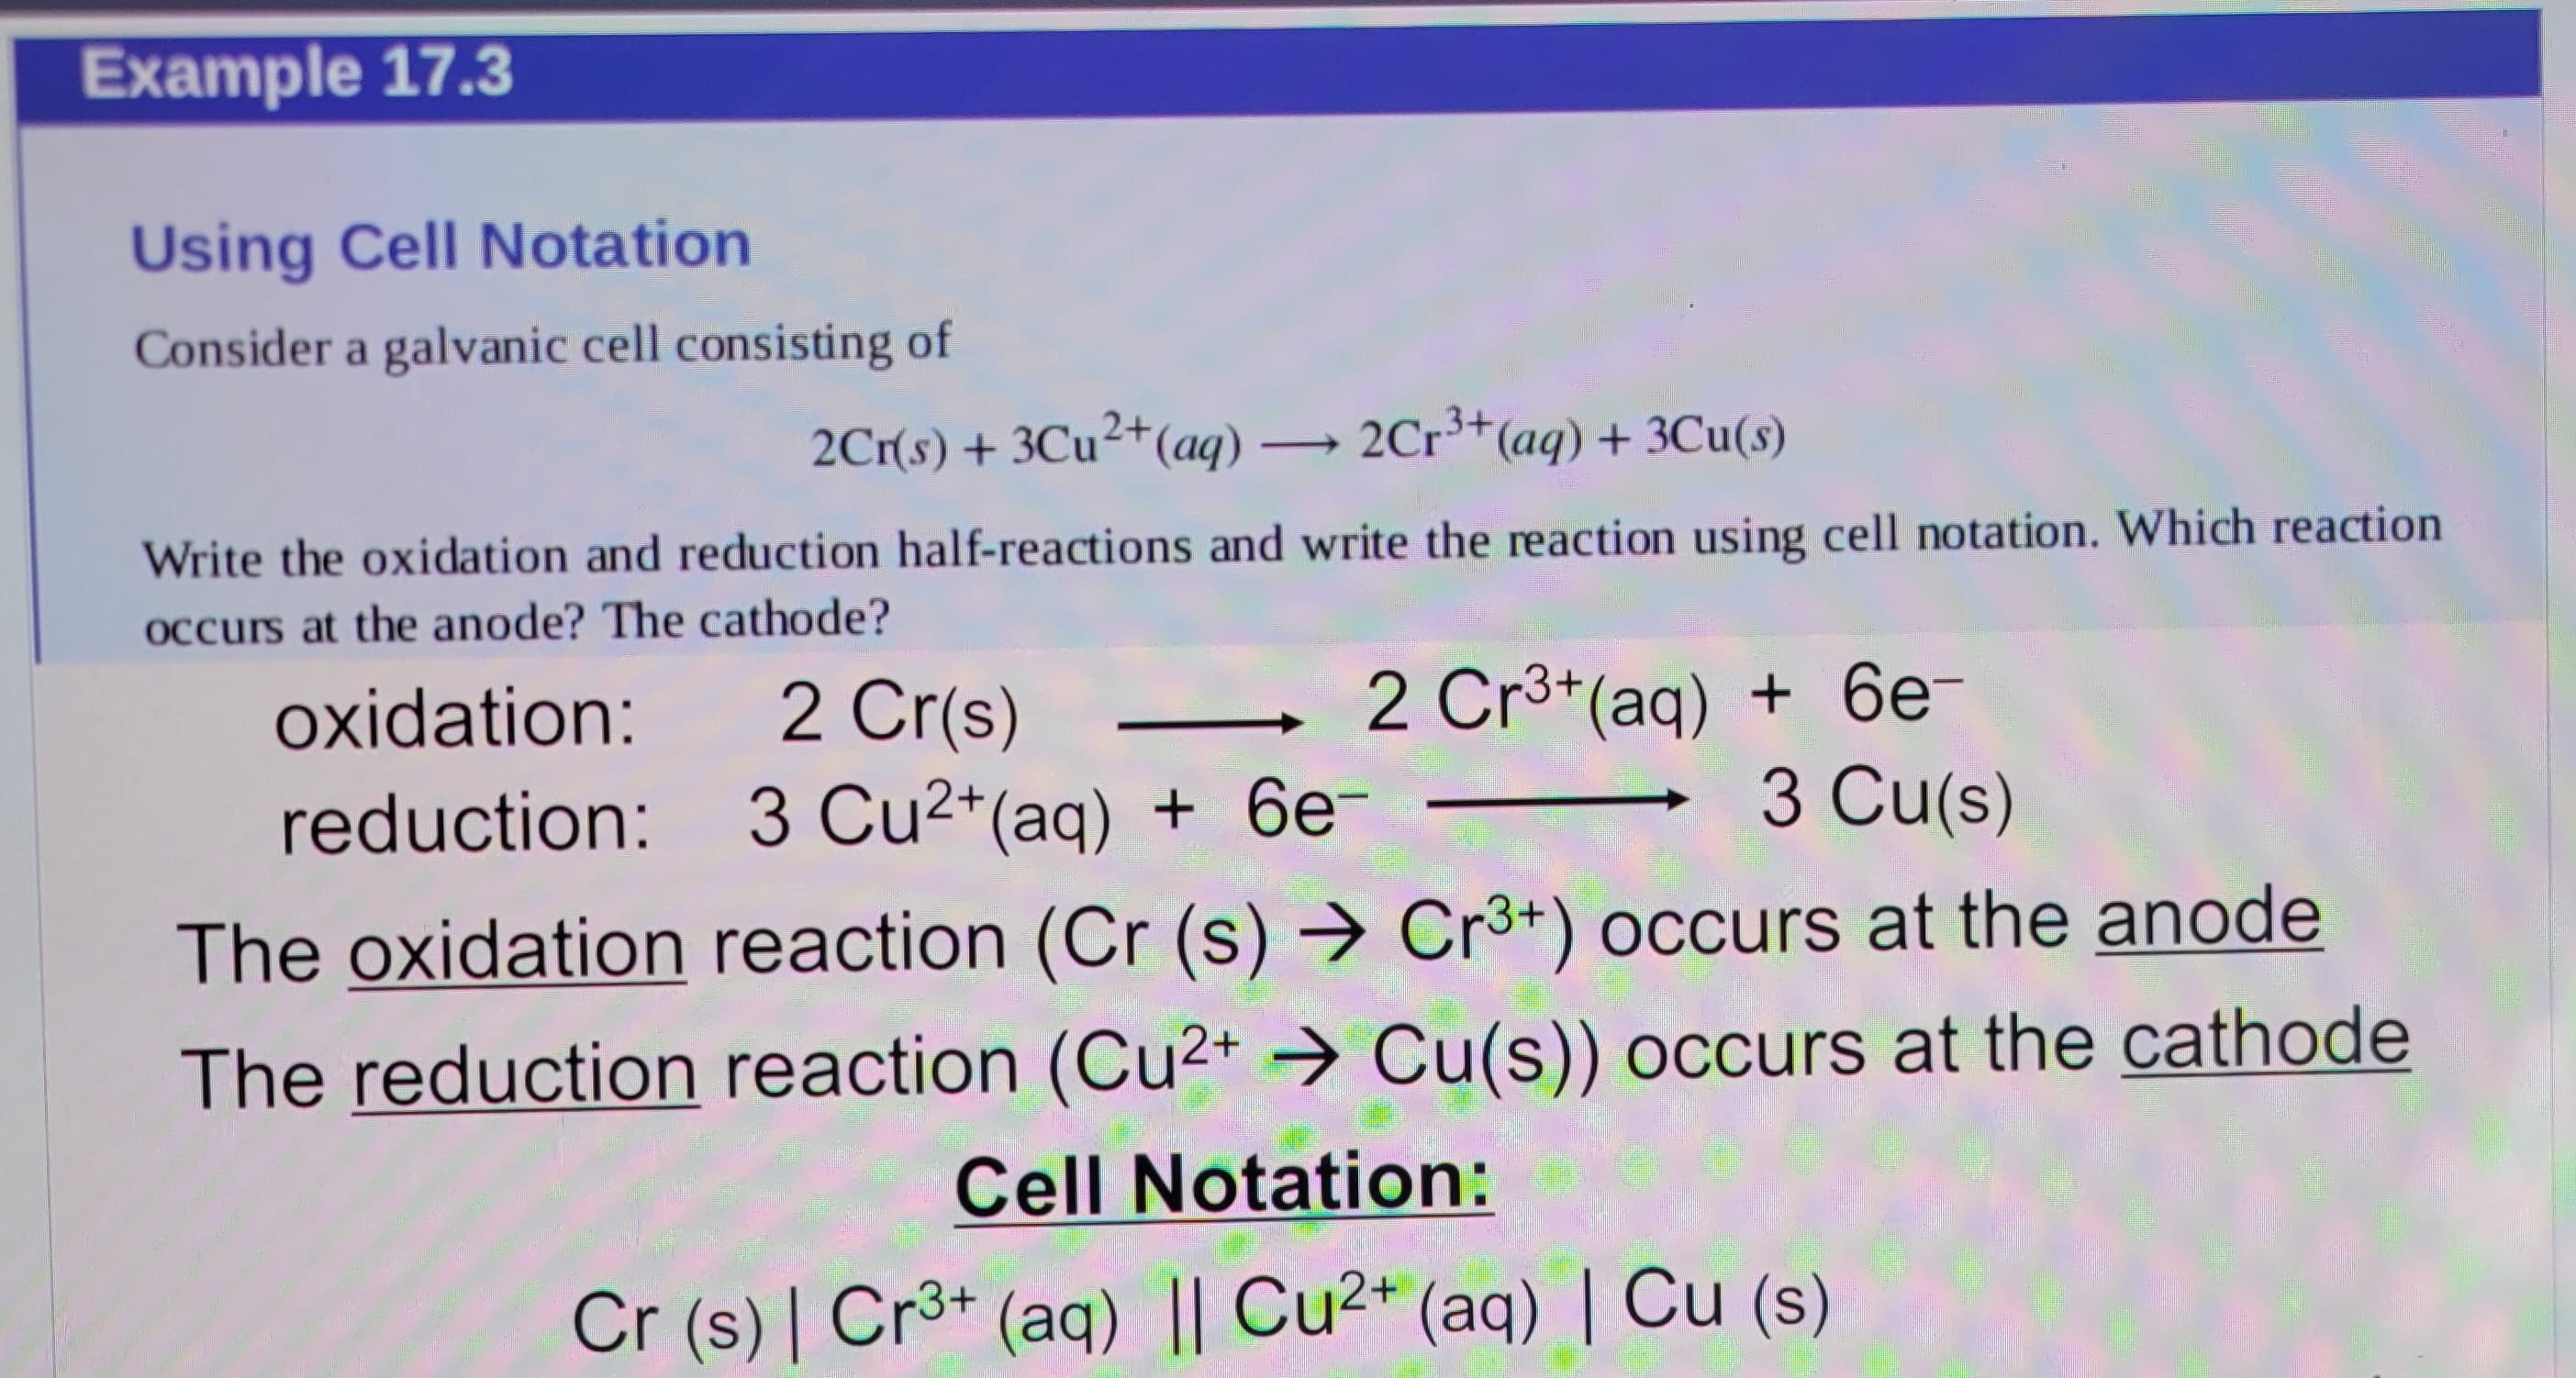 Example 17.3
Using Cell Notation
Consider a galvanic cell consisting of
2Cr(s) + 3Cu²+(aq) → 2Cr³+ (aq) + 3Cu(s)
Write the oxidation and reduction half-reactions and write the reaction using cell notation. Which reaction
occurs at the anode? The cathode?
oxidation:
2 Cr(s)
reduction: 3 Cu2+ (aq) + 6e-
2 Cr3+(aq) + 6e-
3 Cu(s)
The oxidation reaction (Cr (s) → Cr3+) occurs at the anode
The reduction reaction (Cu2+ Cu(s)) occurs at the cathode
Cell Notation:
Cr (s) | Cr3+ (aq) || Cu2+ (aq) | Cu (s)